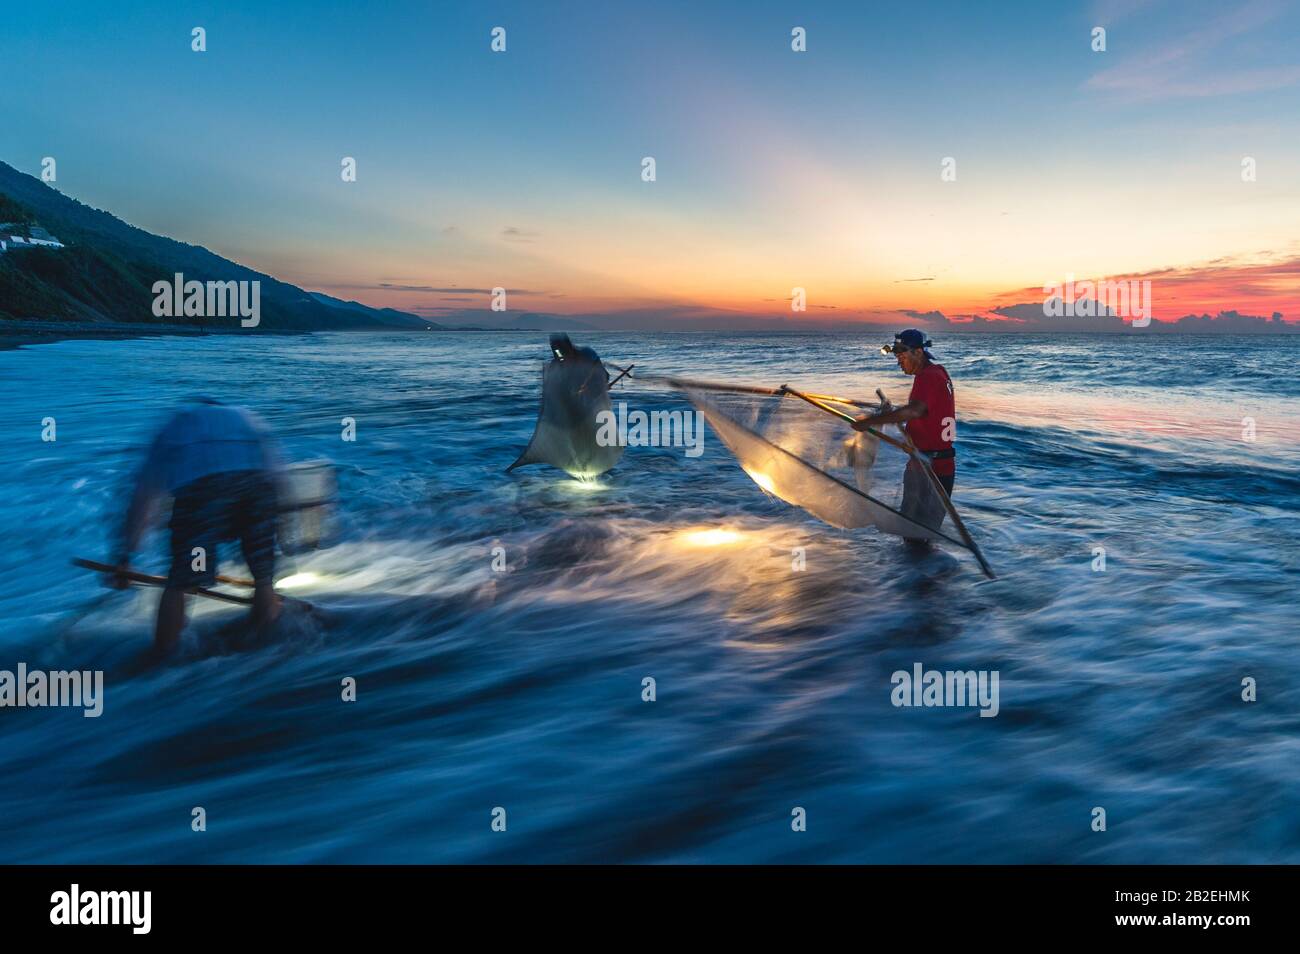 Taitung, Taiwan - July 31, 2016: traditional method to catch fish with triangle fishing net at the mouth of  jinlun river, taitung, taiwan. Stock Photo